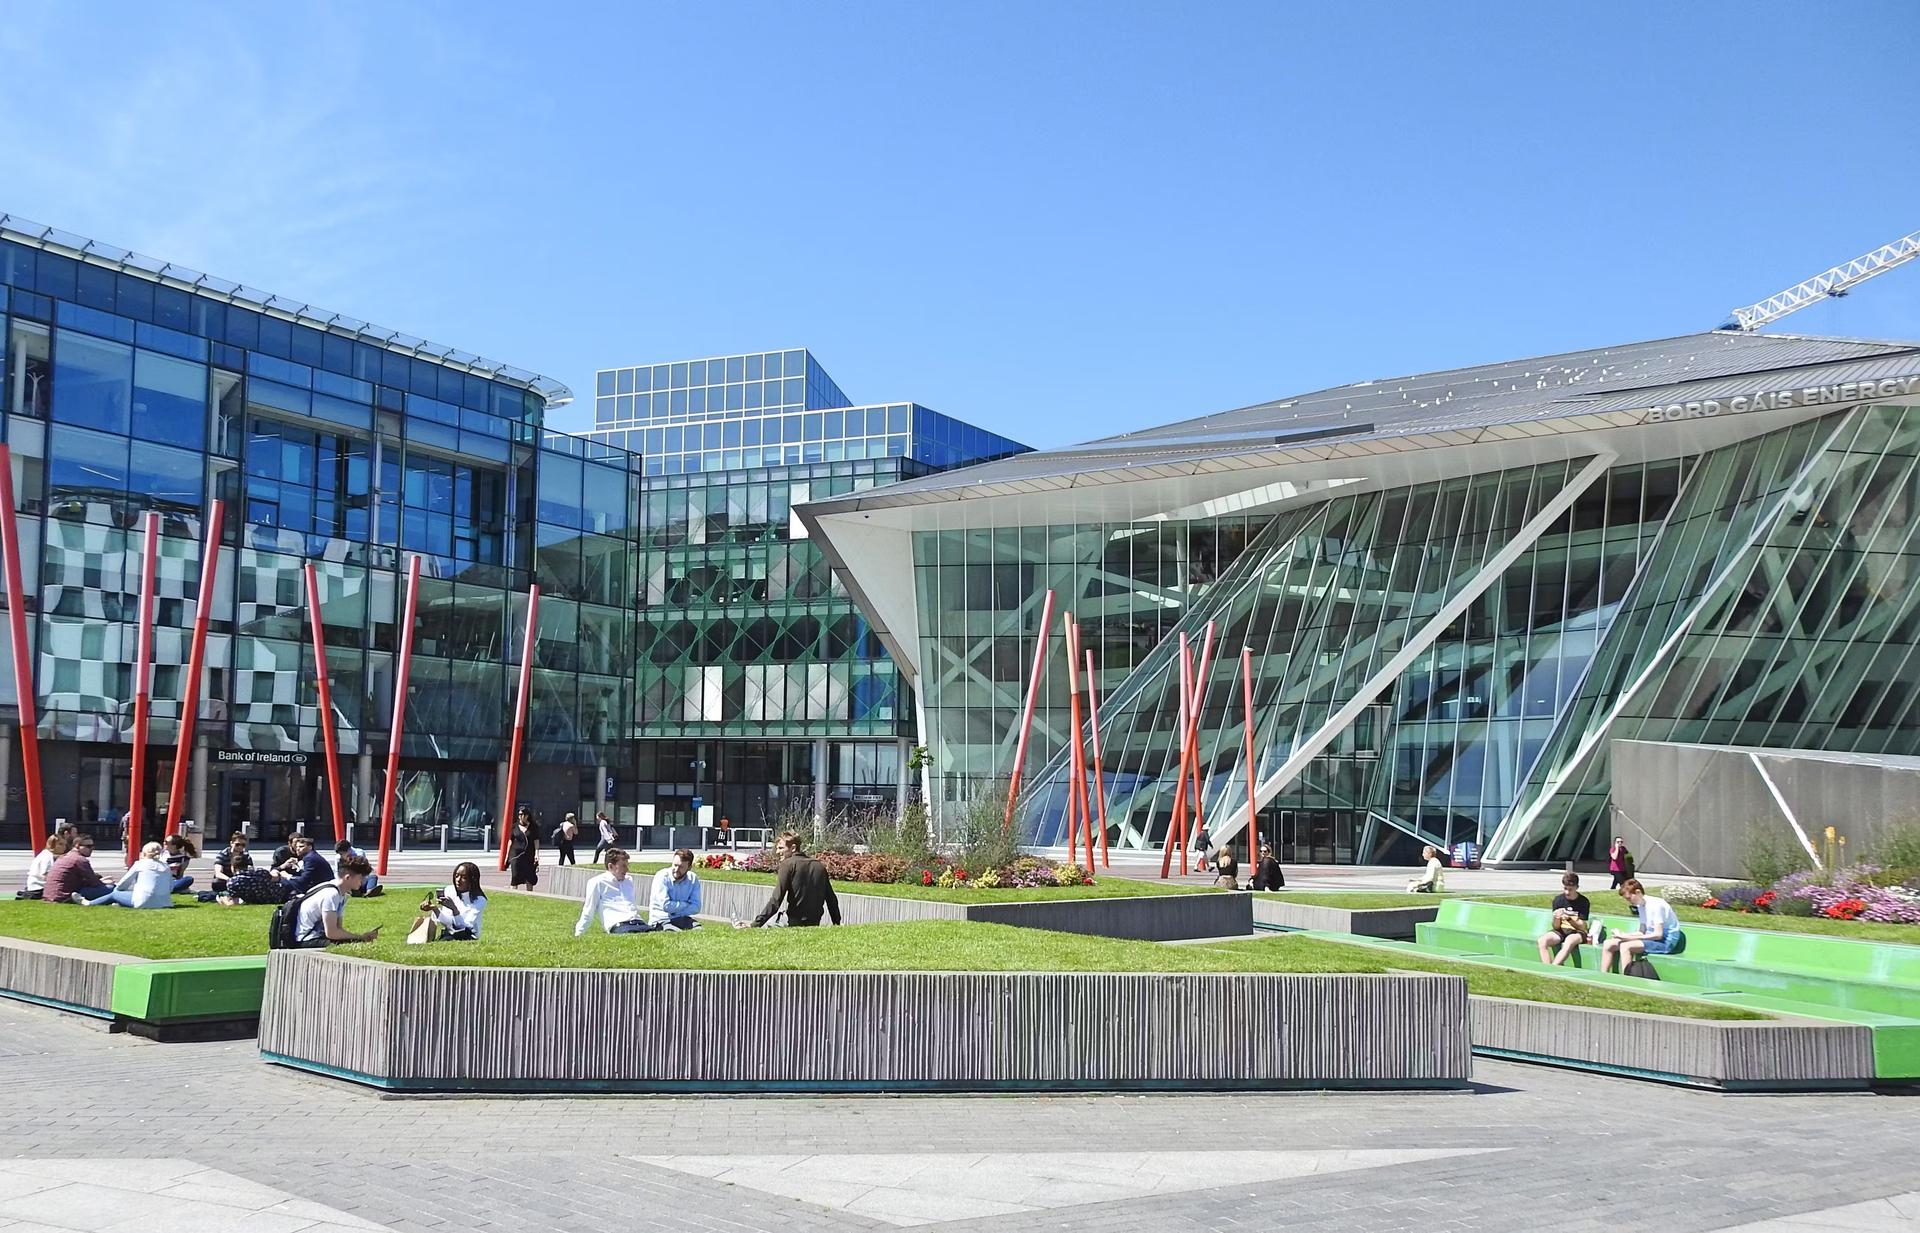 People relaxing outdoors in front of the Bord Gais Energy Theatre